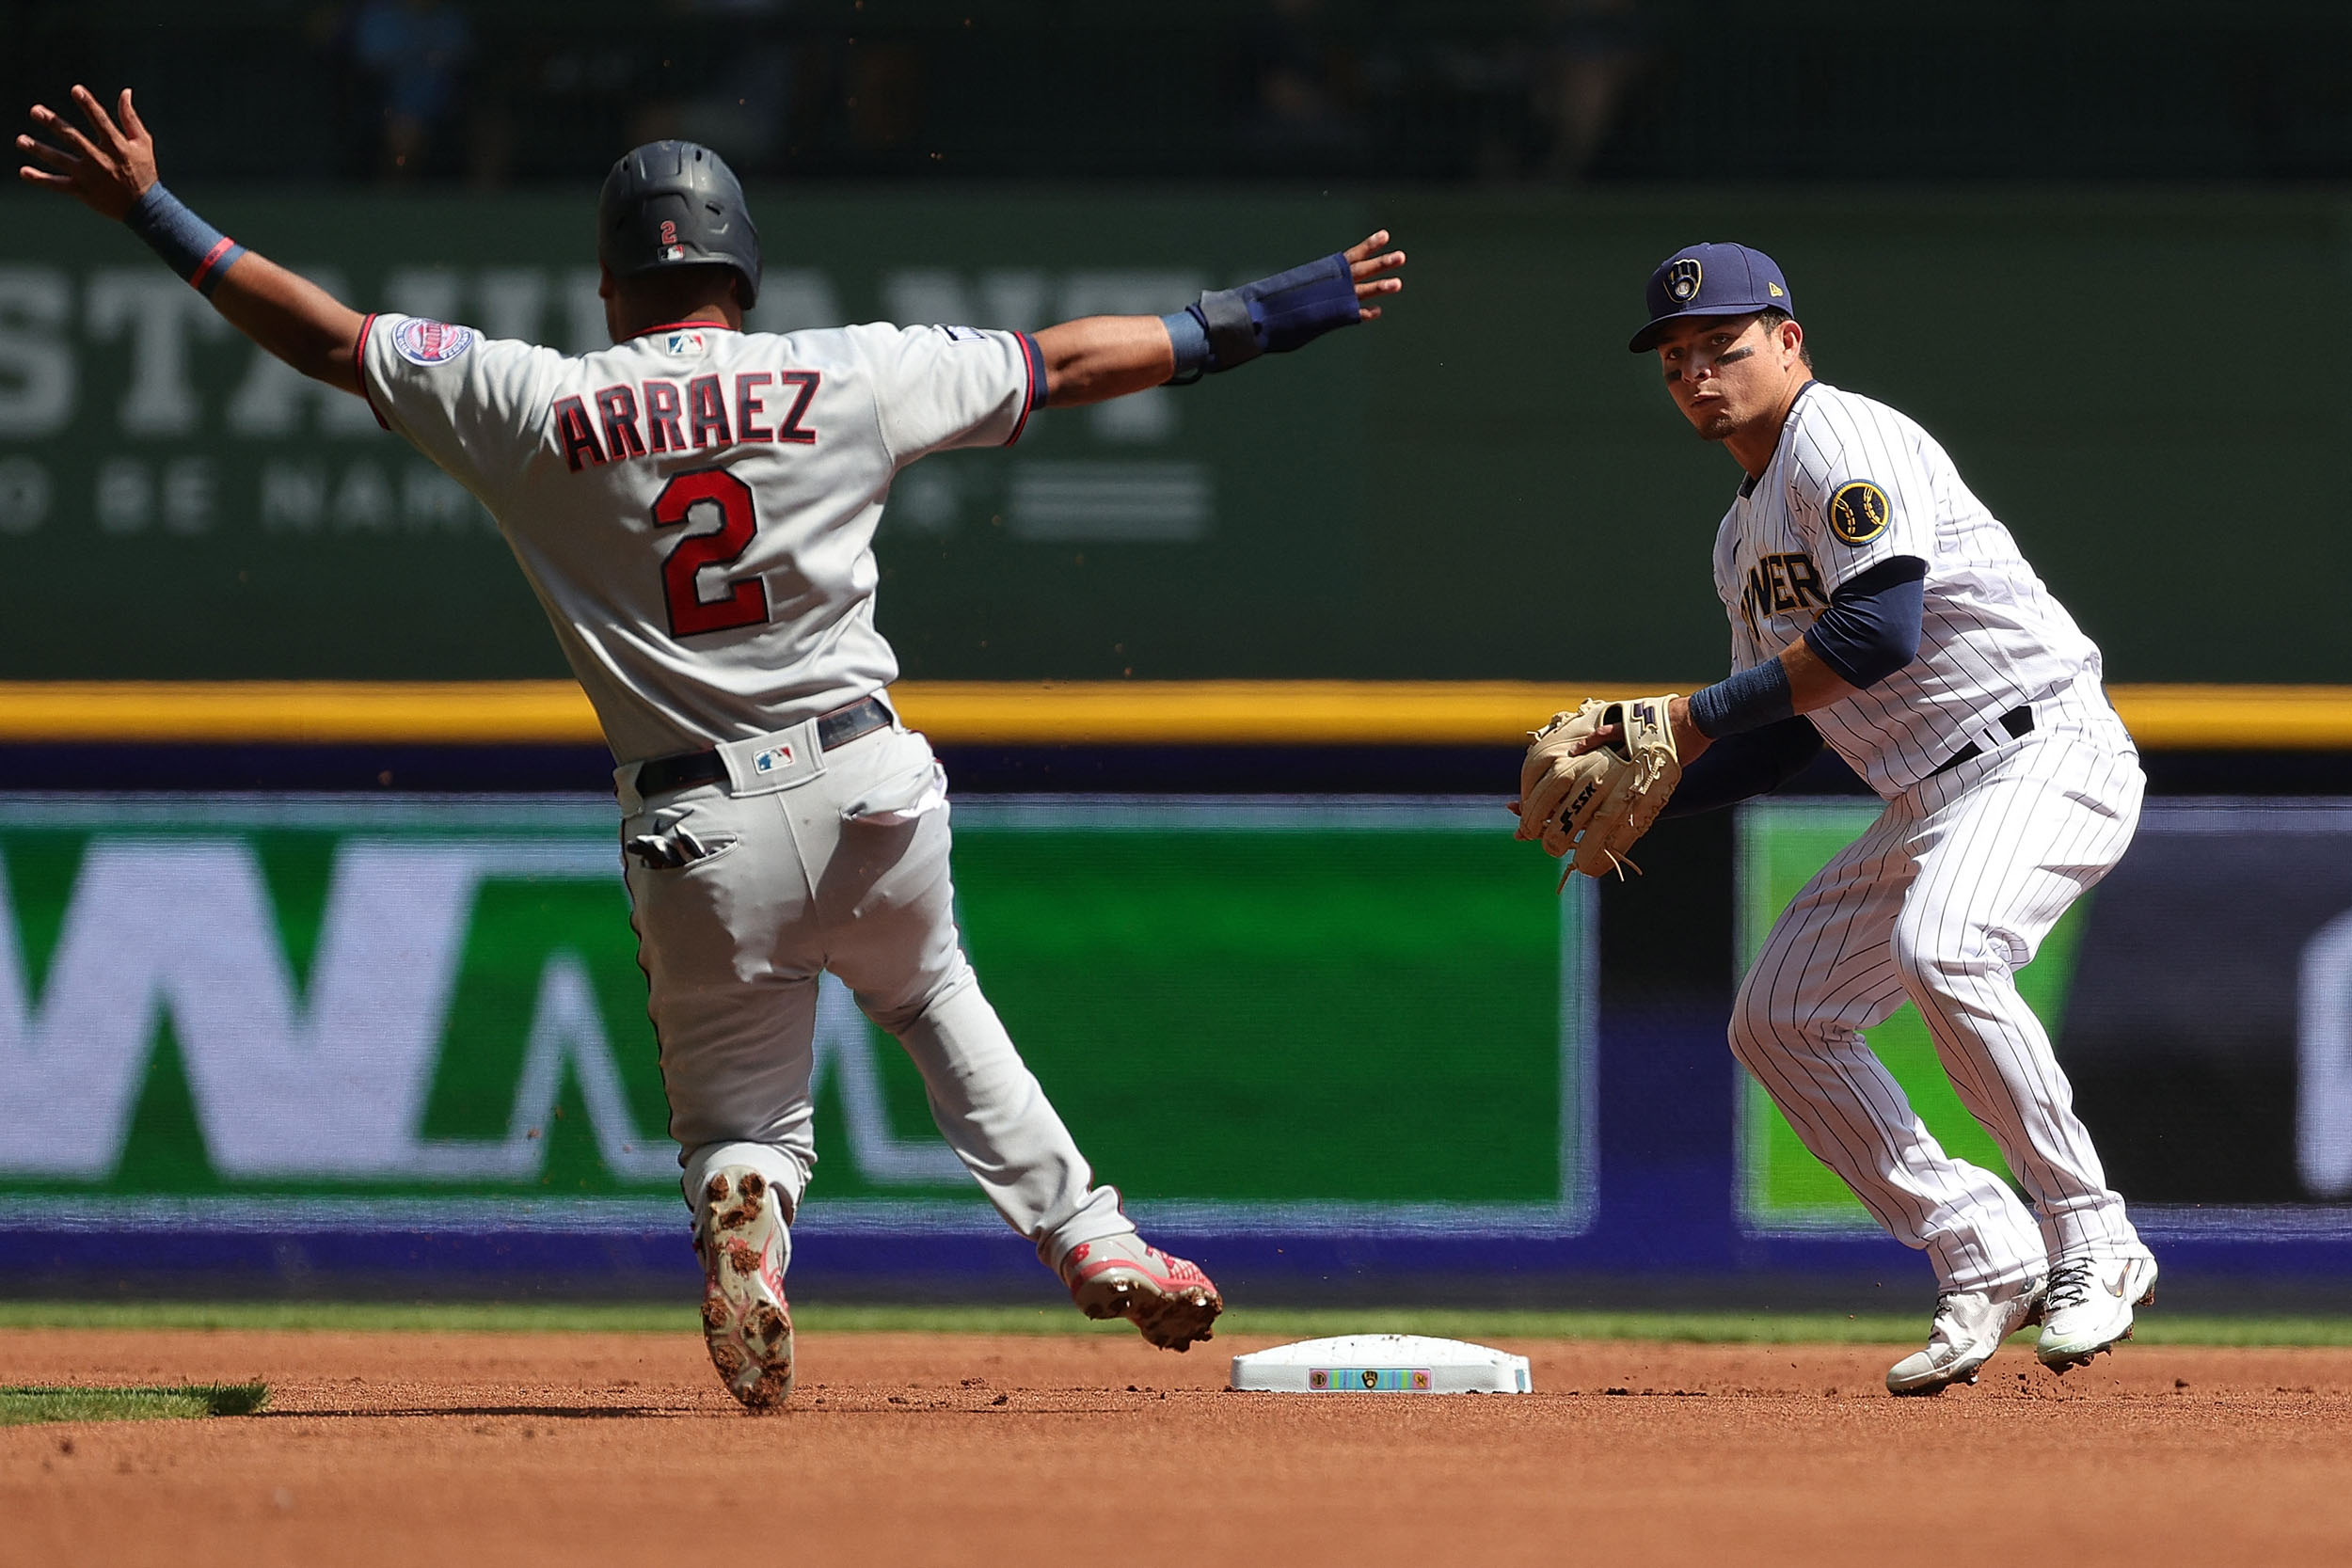 MILWAUKEE, WISCONSIN - APRIL 04: Luis Arraez #2 of the Minnesota Twins is forced out at second base as Luis Urias #2 of the Milwaukee Brewers makes a throw to first base during a game at American Family Field on April 04, 2021 in Milwaukee, Wisconsin. Stacy Revere/Getty Images/AFP (Photo by Stacy Revere / GETTY IMAGES NORTH AMERICA / Getty Images via AFP)